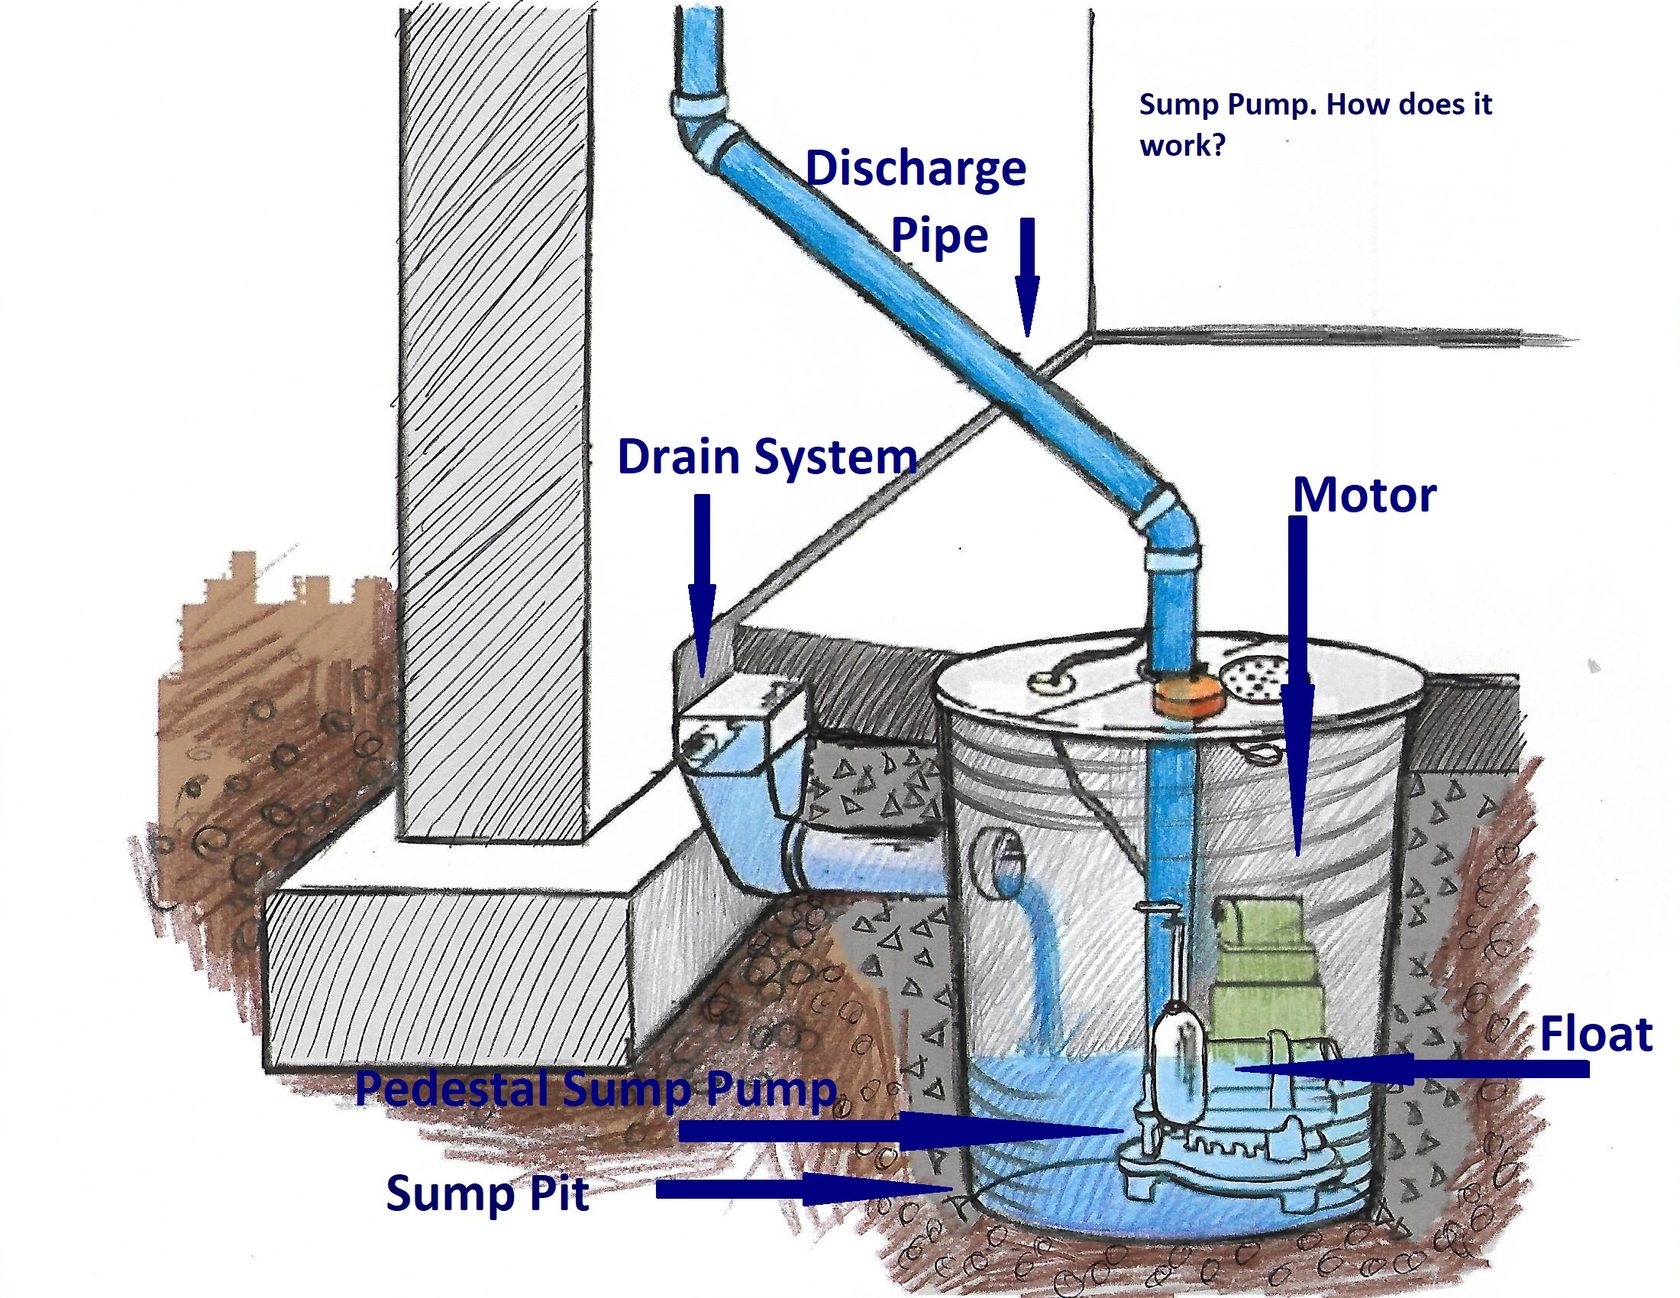 who does battery backup for sump pump work